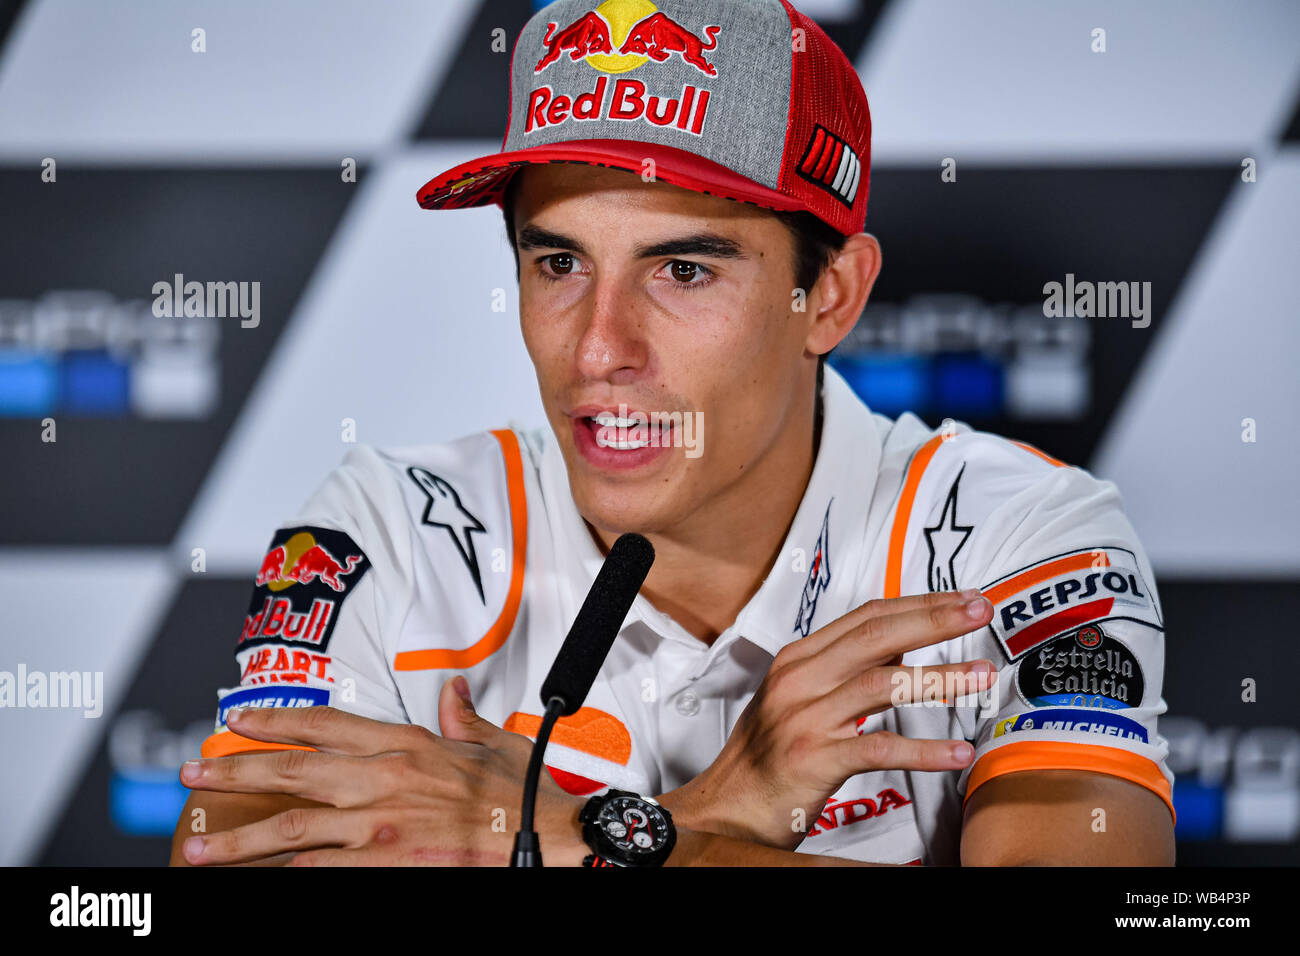 TOWCESTER, UNITED KINGDOM. 24th Aug, 2019. Marc Marquez (SPA) of Repsol Honda Team during Press Conference prior to Sunday’s Race of the GoPro British Grand Prix at Silverstone Circuit on Saturday, August 24, 2019 in TOWCESTER, ENGLAND. Credit: Taka G Wu/Alamy Live News Stock Photo